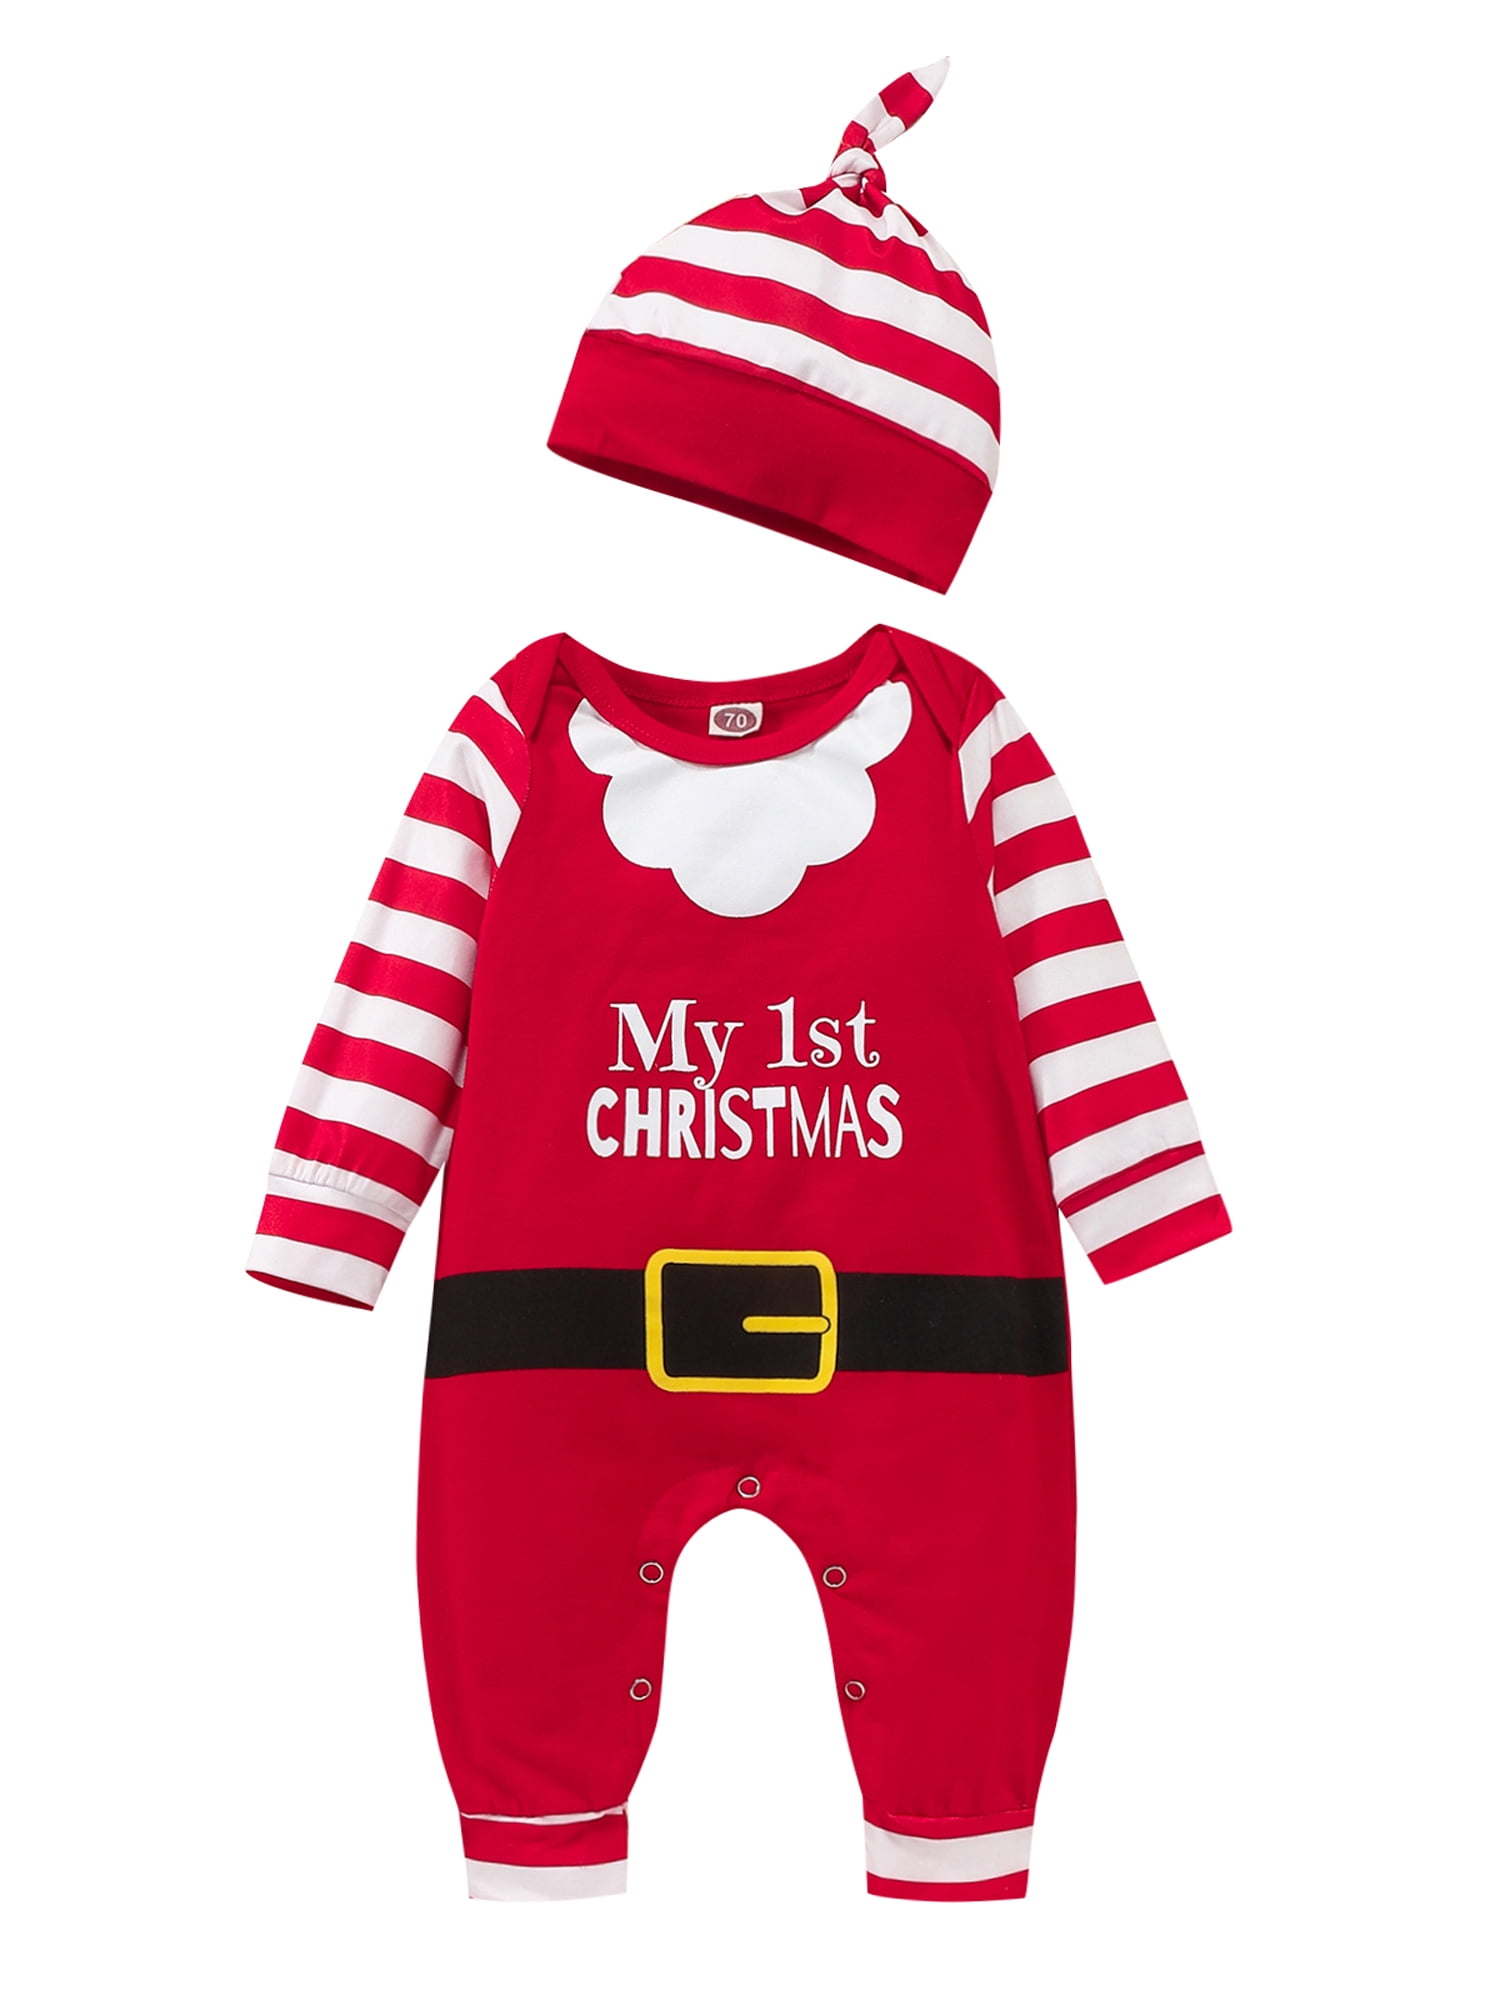 2PCS Unisex Baby First Christmas Santa Claus Striped Romper Jumpsuits with Hats Xmas Clothing Sets